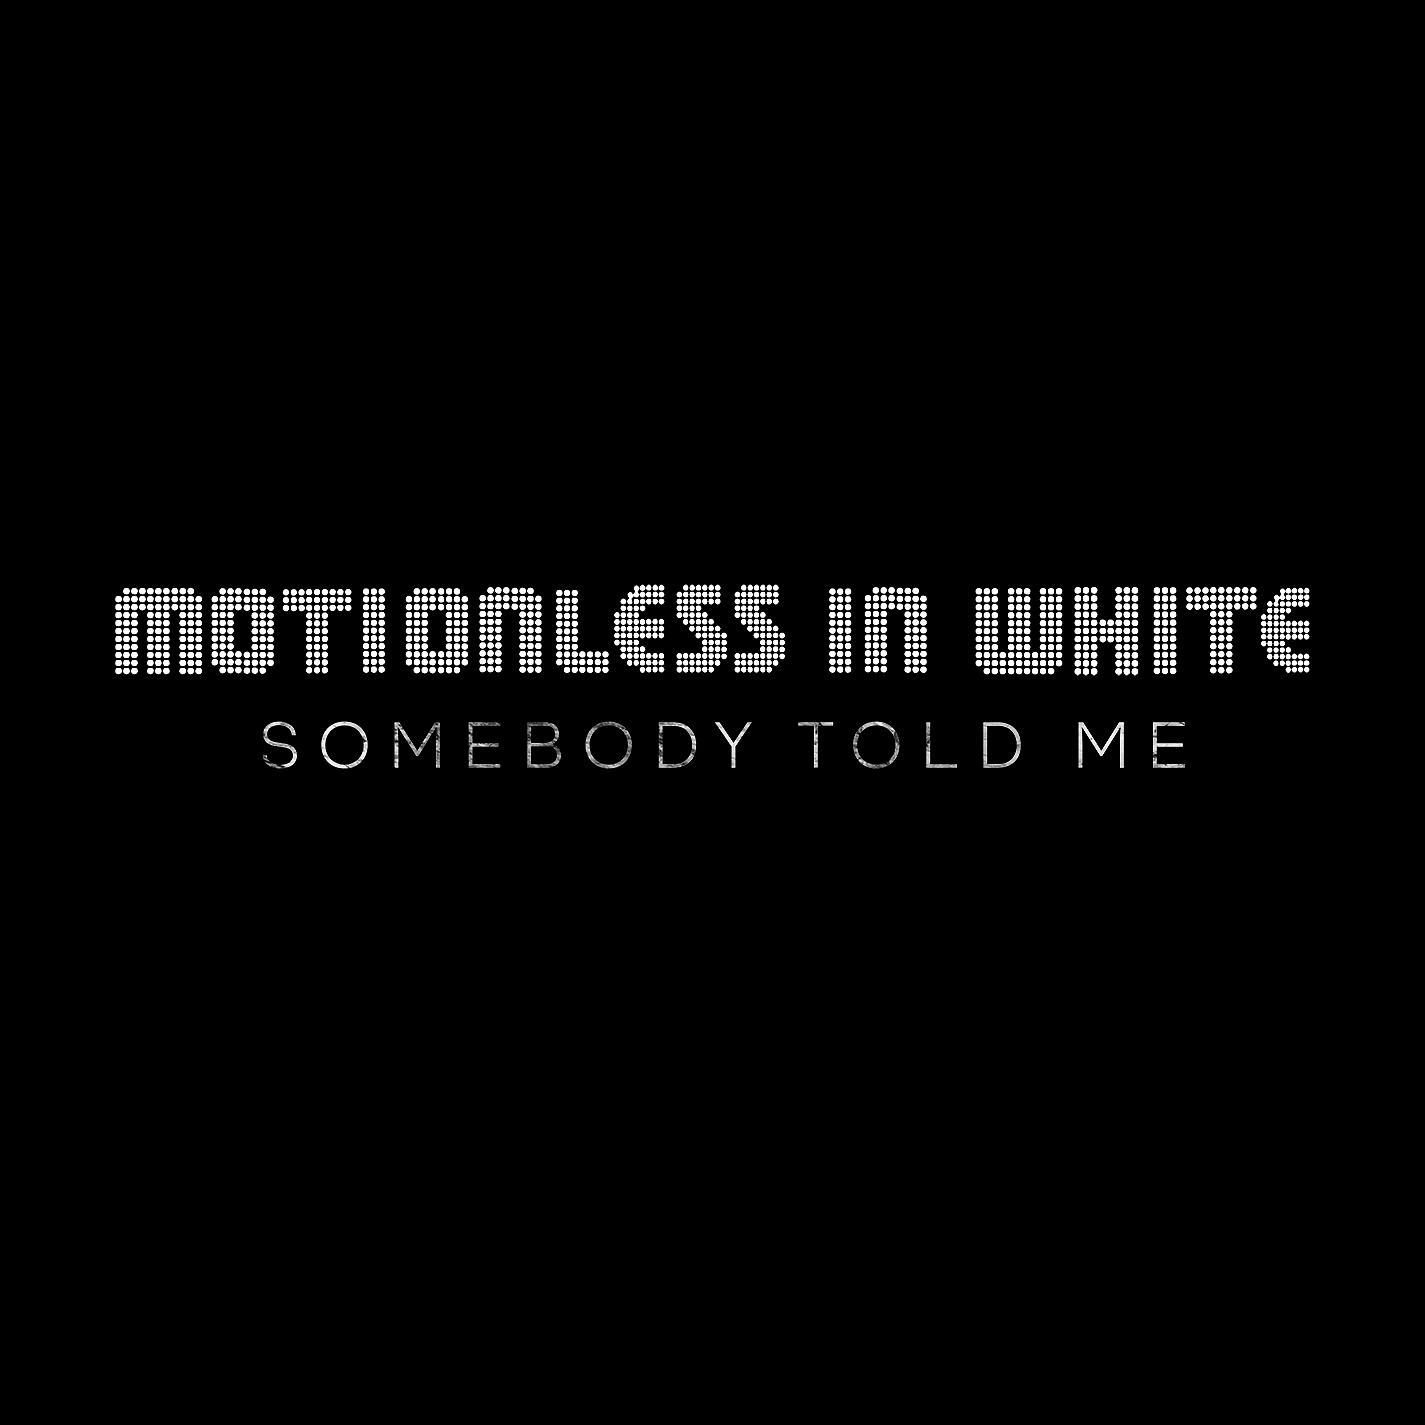 Somebody told me Motionless in White. The Killers Somebody told me. Somebody told me обложка. Somebody told me трек – the Killers. Somebody told me песня